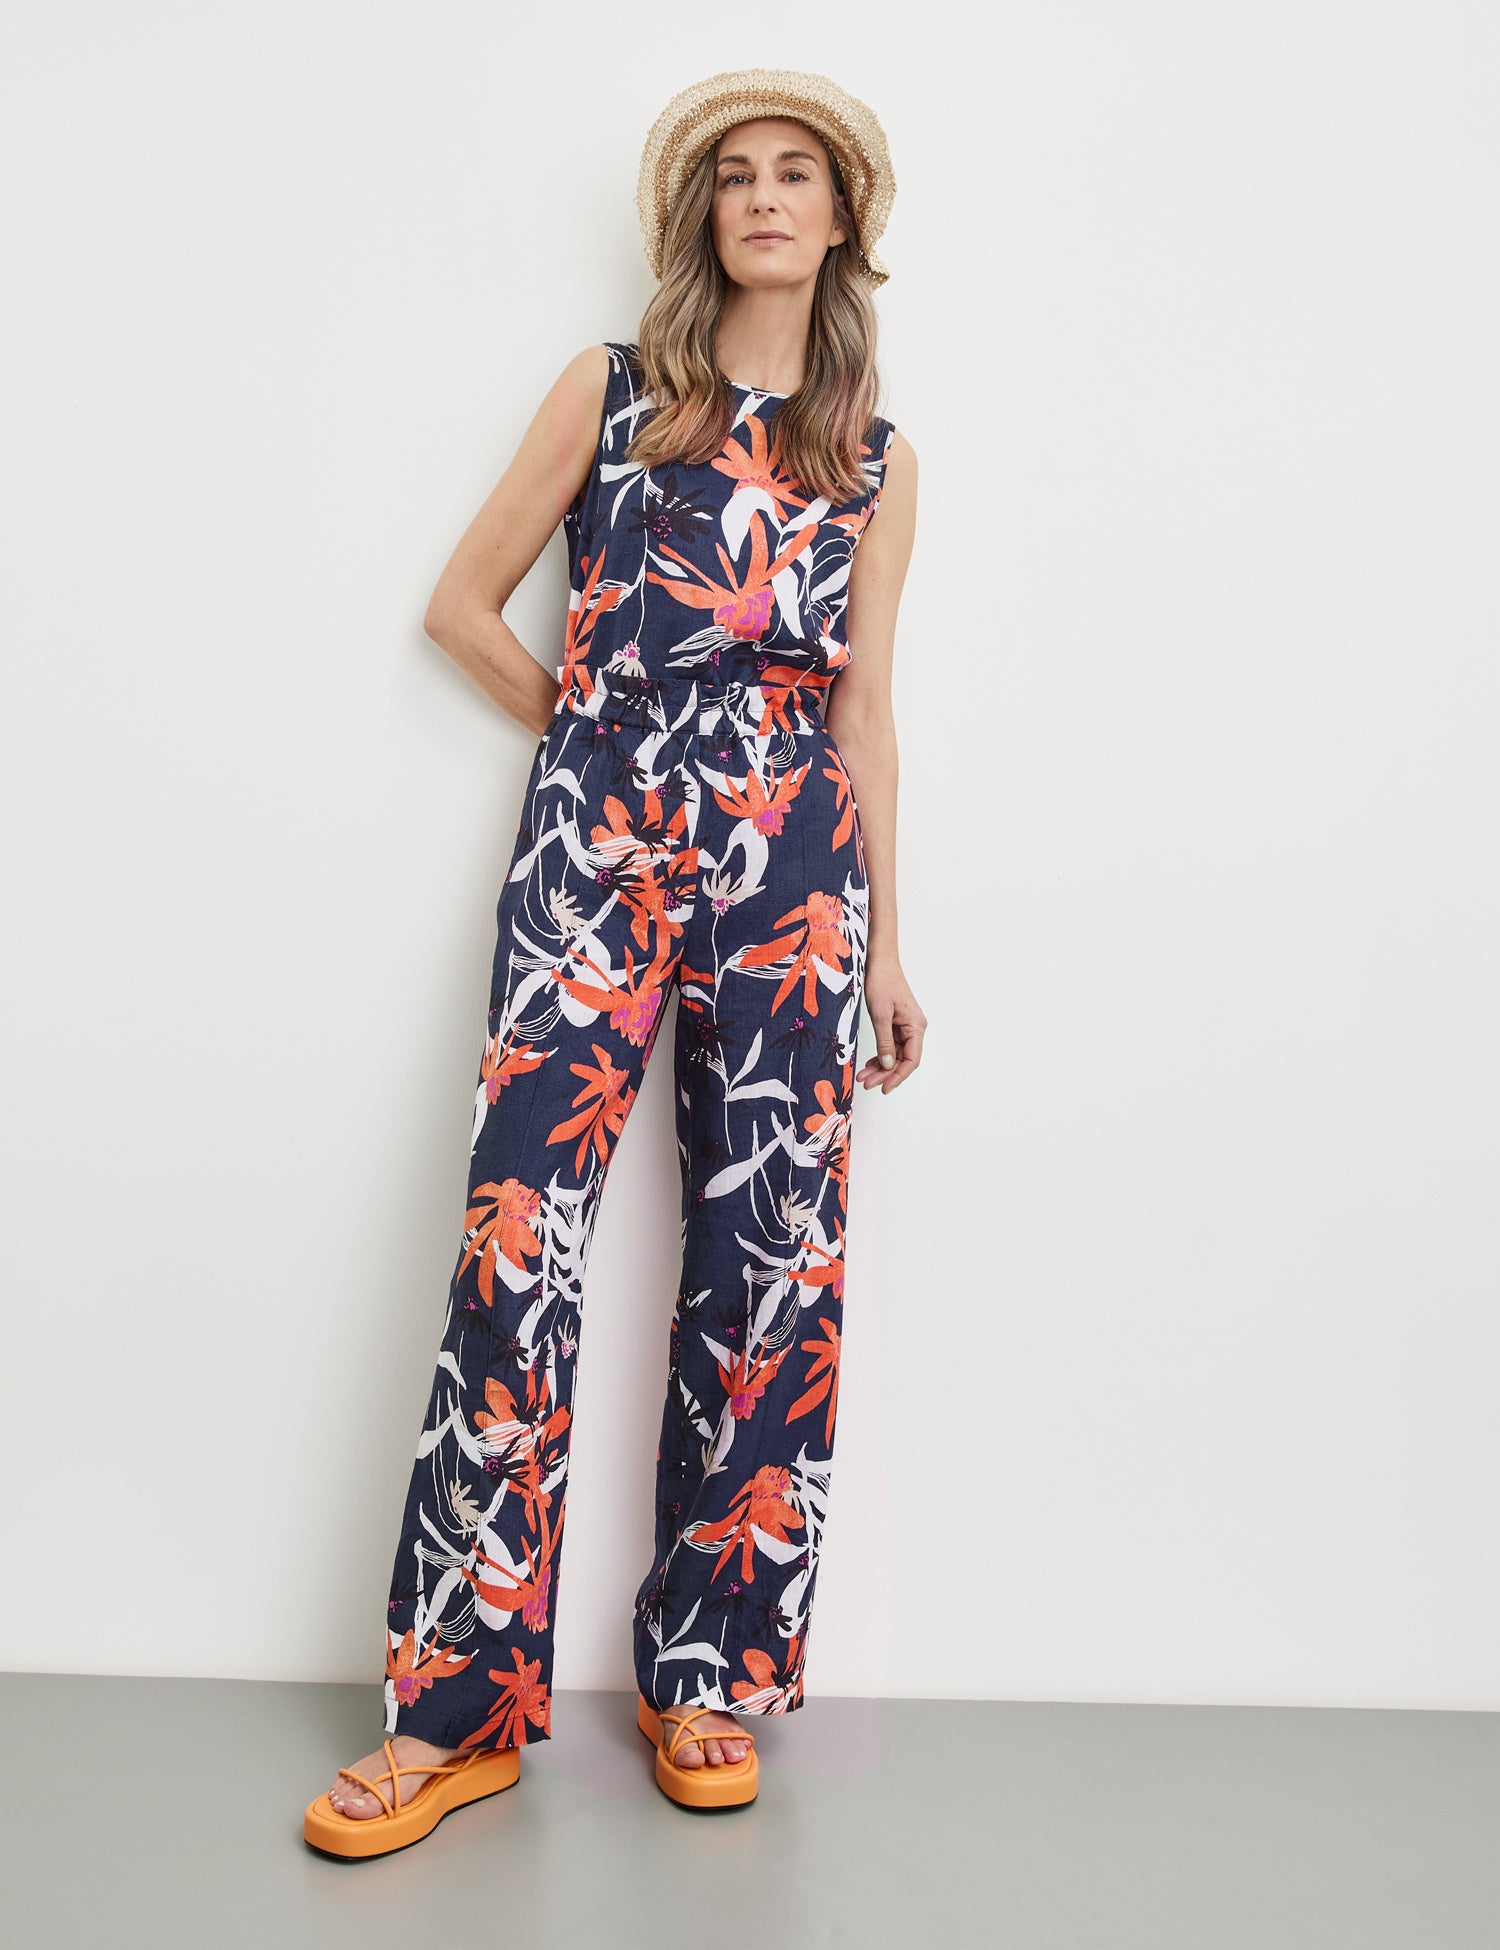 Patterned Linen Trousers With A Wide Leg